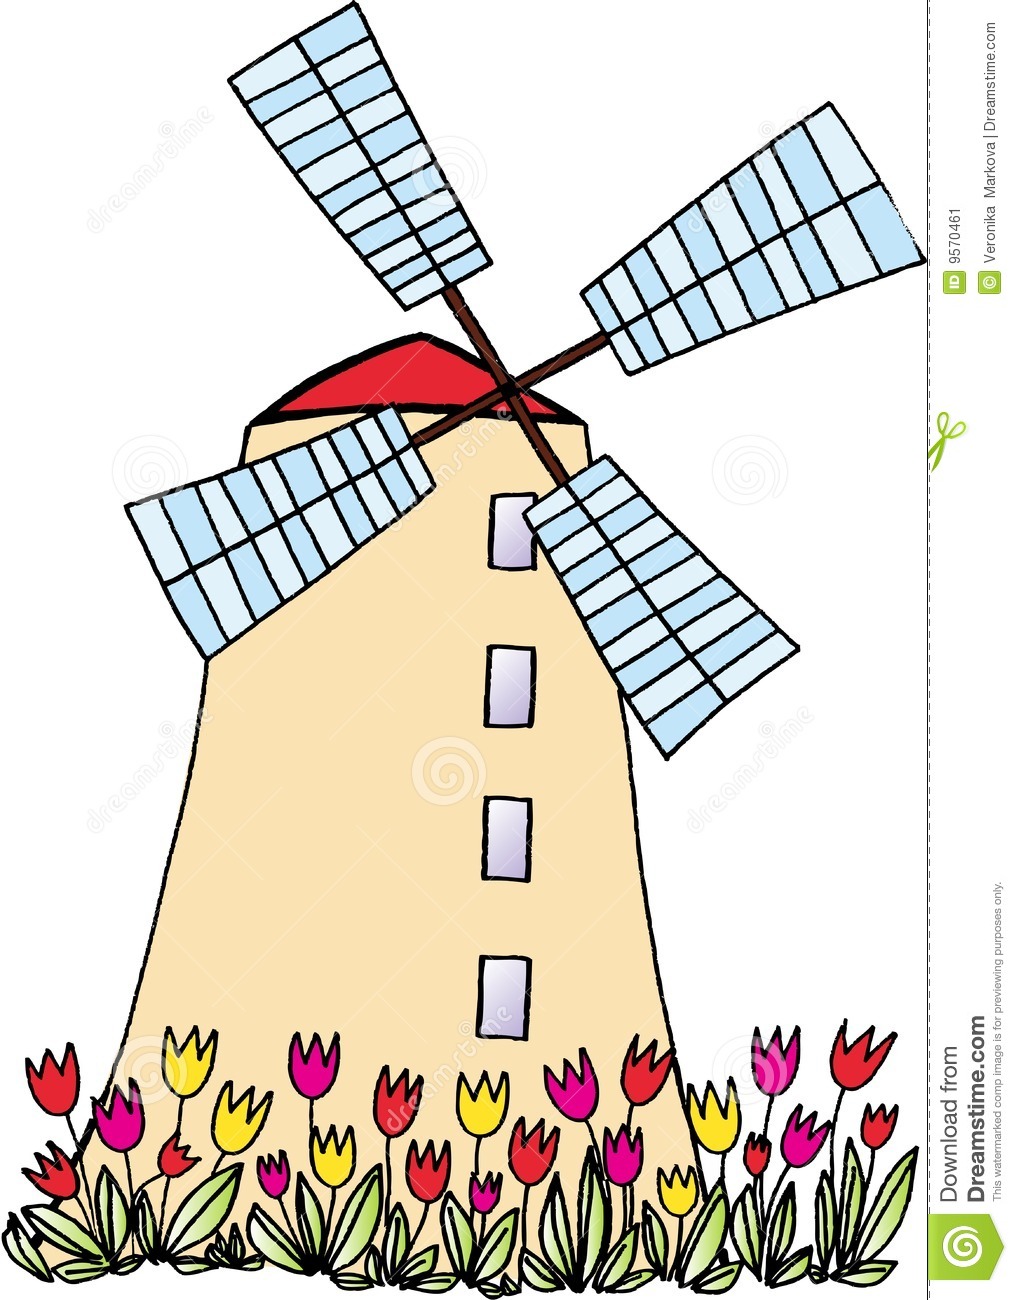 Windmill clipart - Clipground